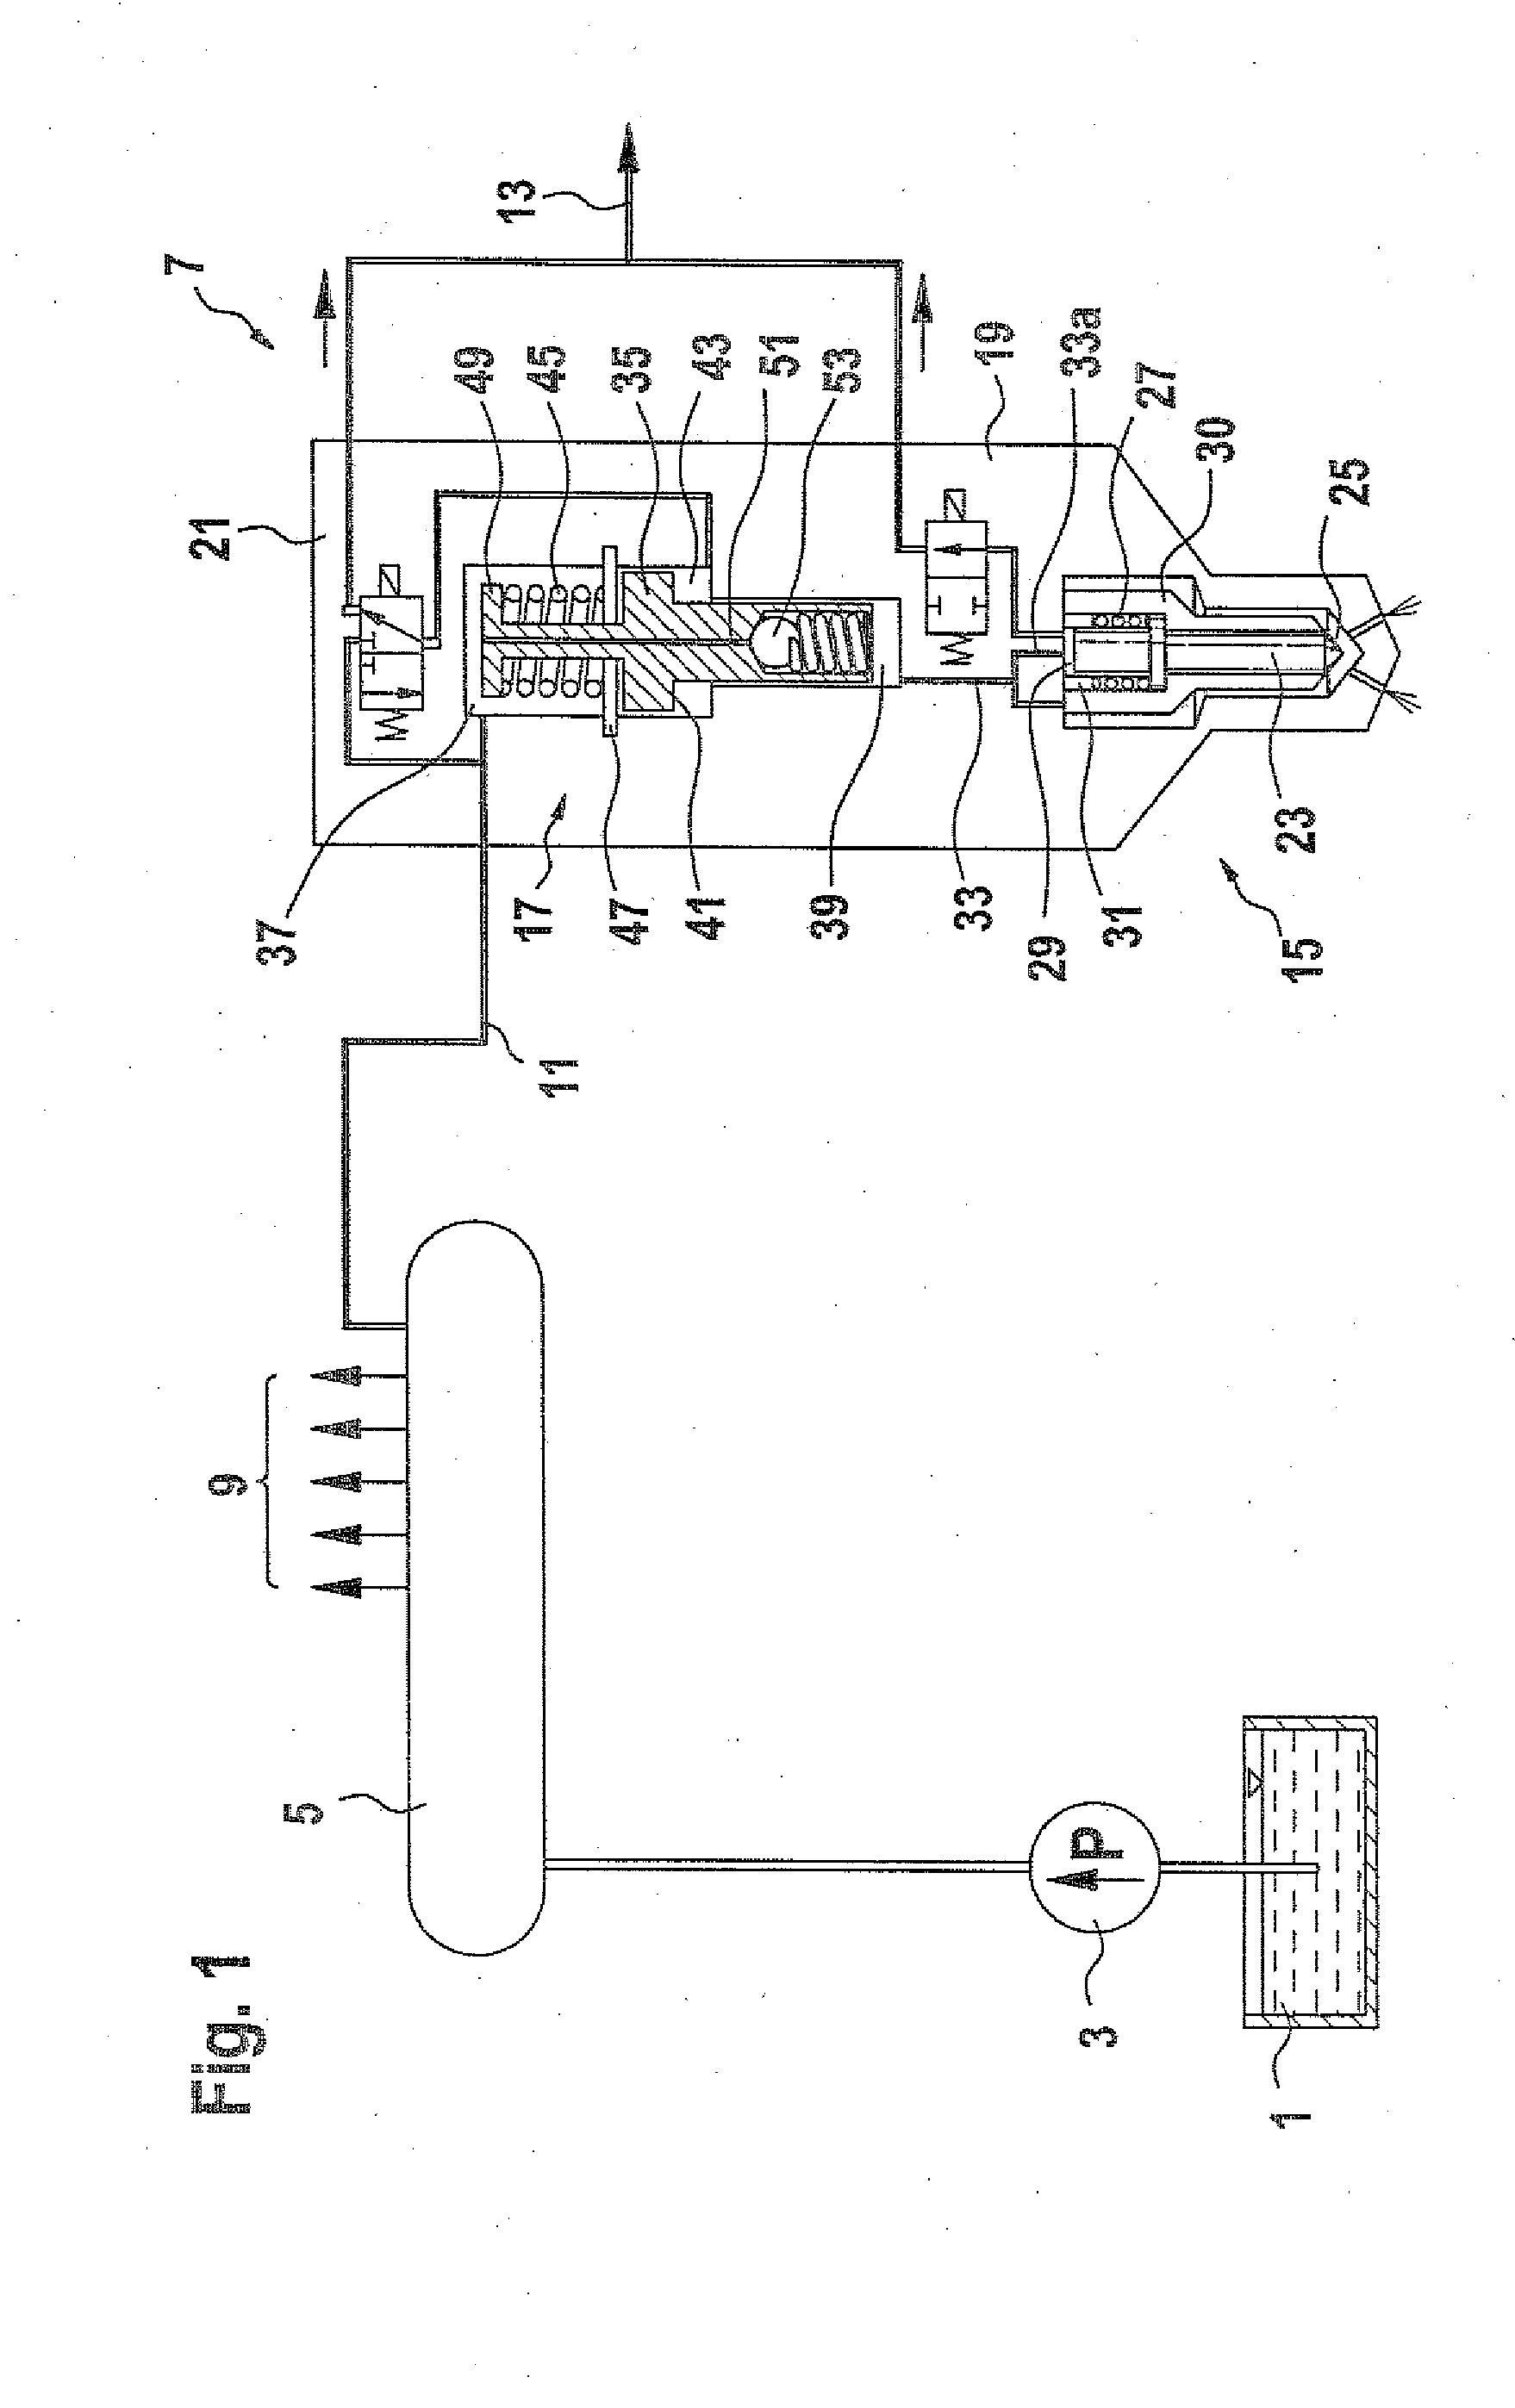 Injector With A Pressure Intensifier That Can Be Switched On